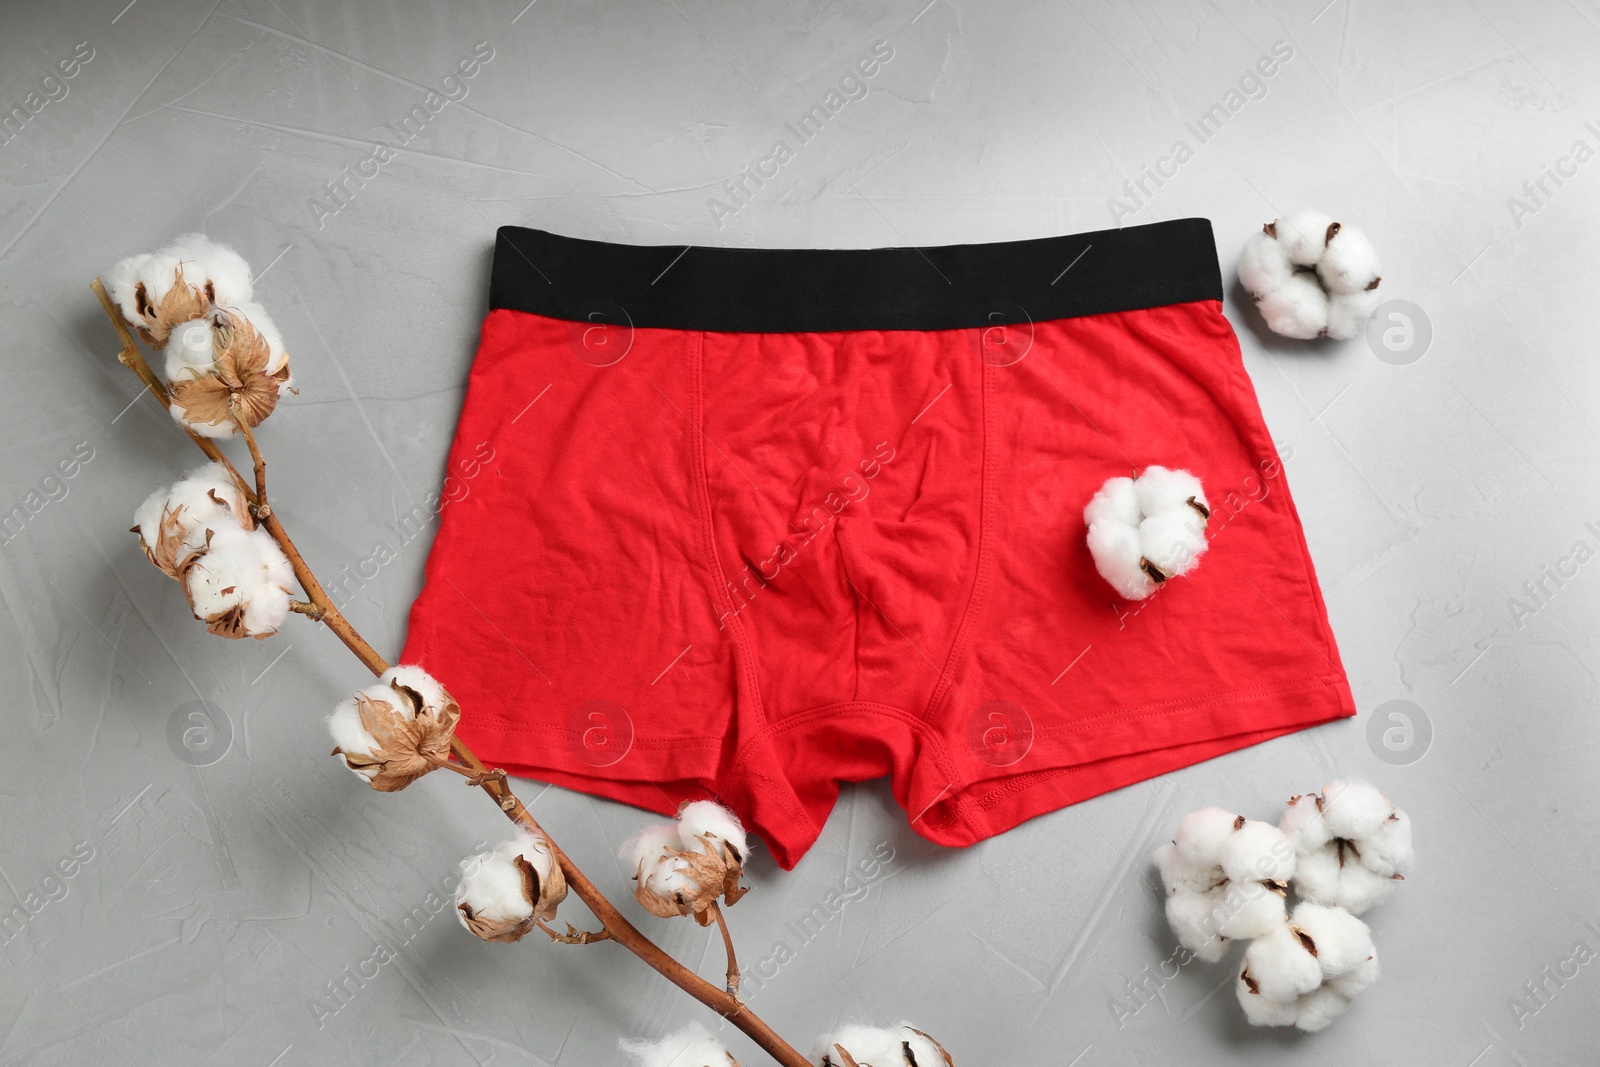 Photo of Men's underwear and cotton flowers on light background, flat lay